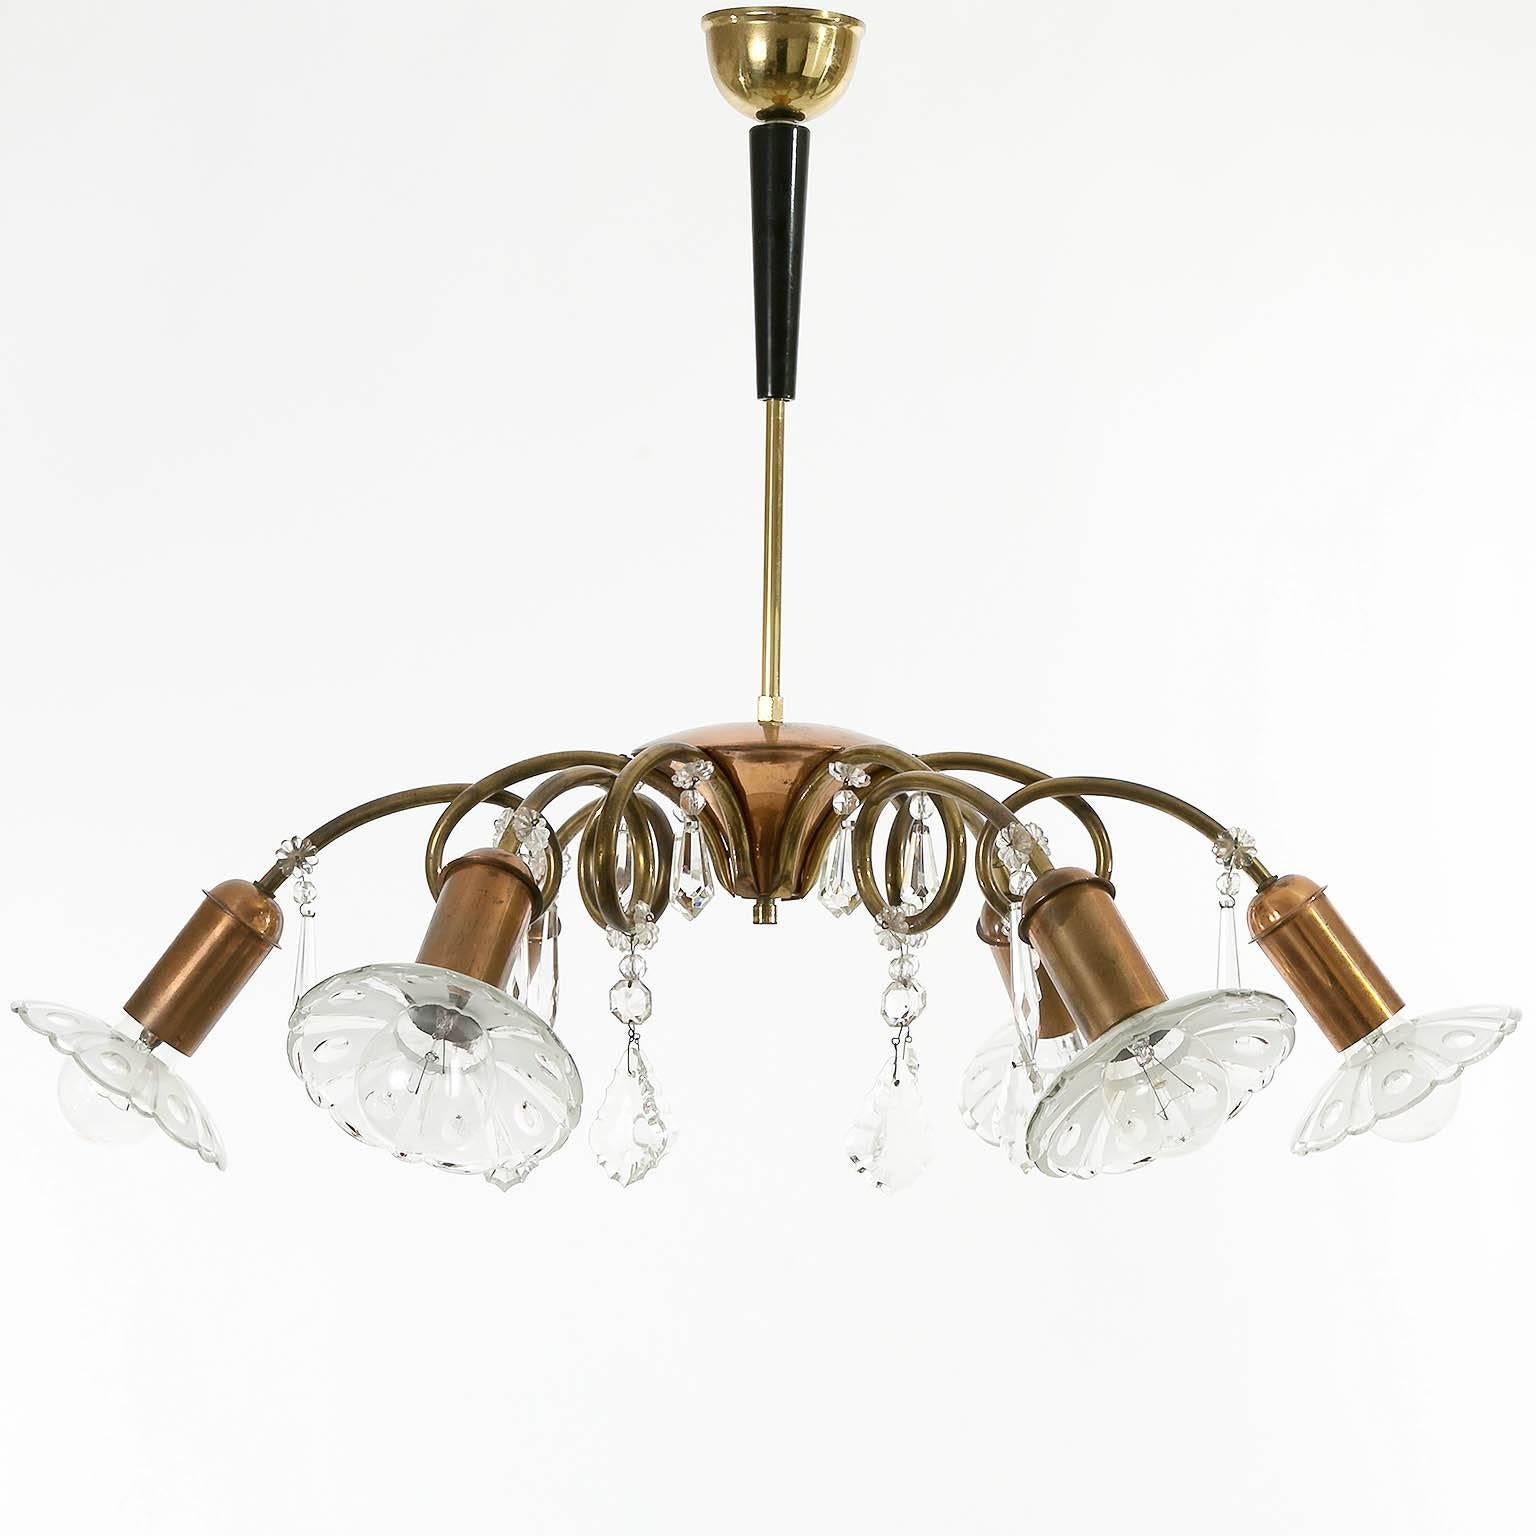 A Mid-Century Modern six-arm chandelier by Rupert Nikoll, Vienna, 1950s.
It is made of cut-glass, natural aged copper and brass. The rod is covered by ebonized wood. 
The piece is decorated with a lot of cut glass pieces.